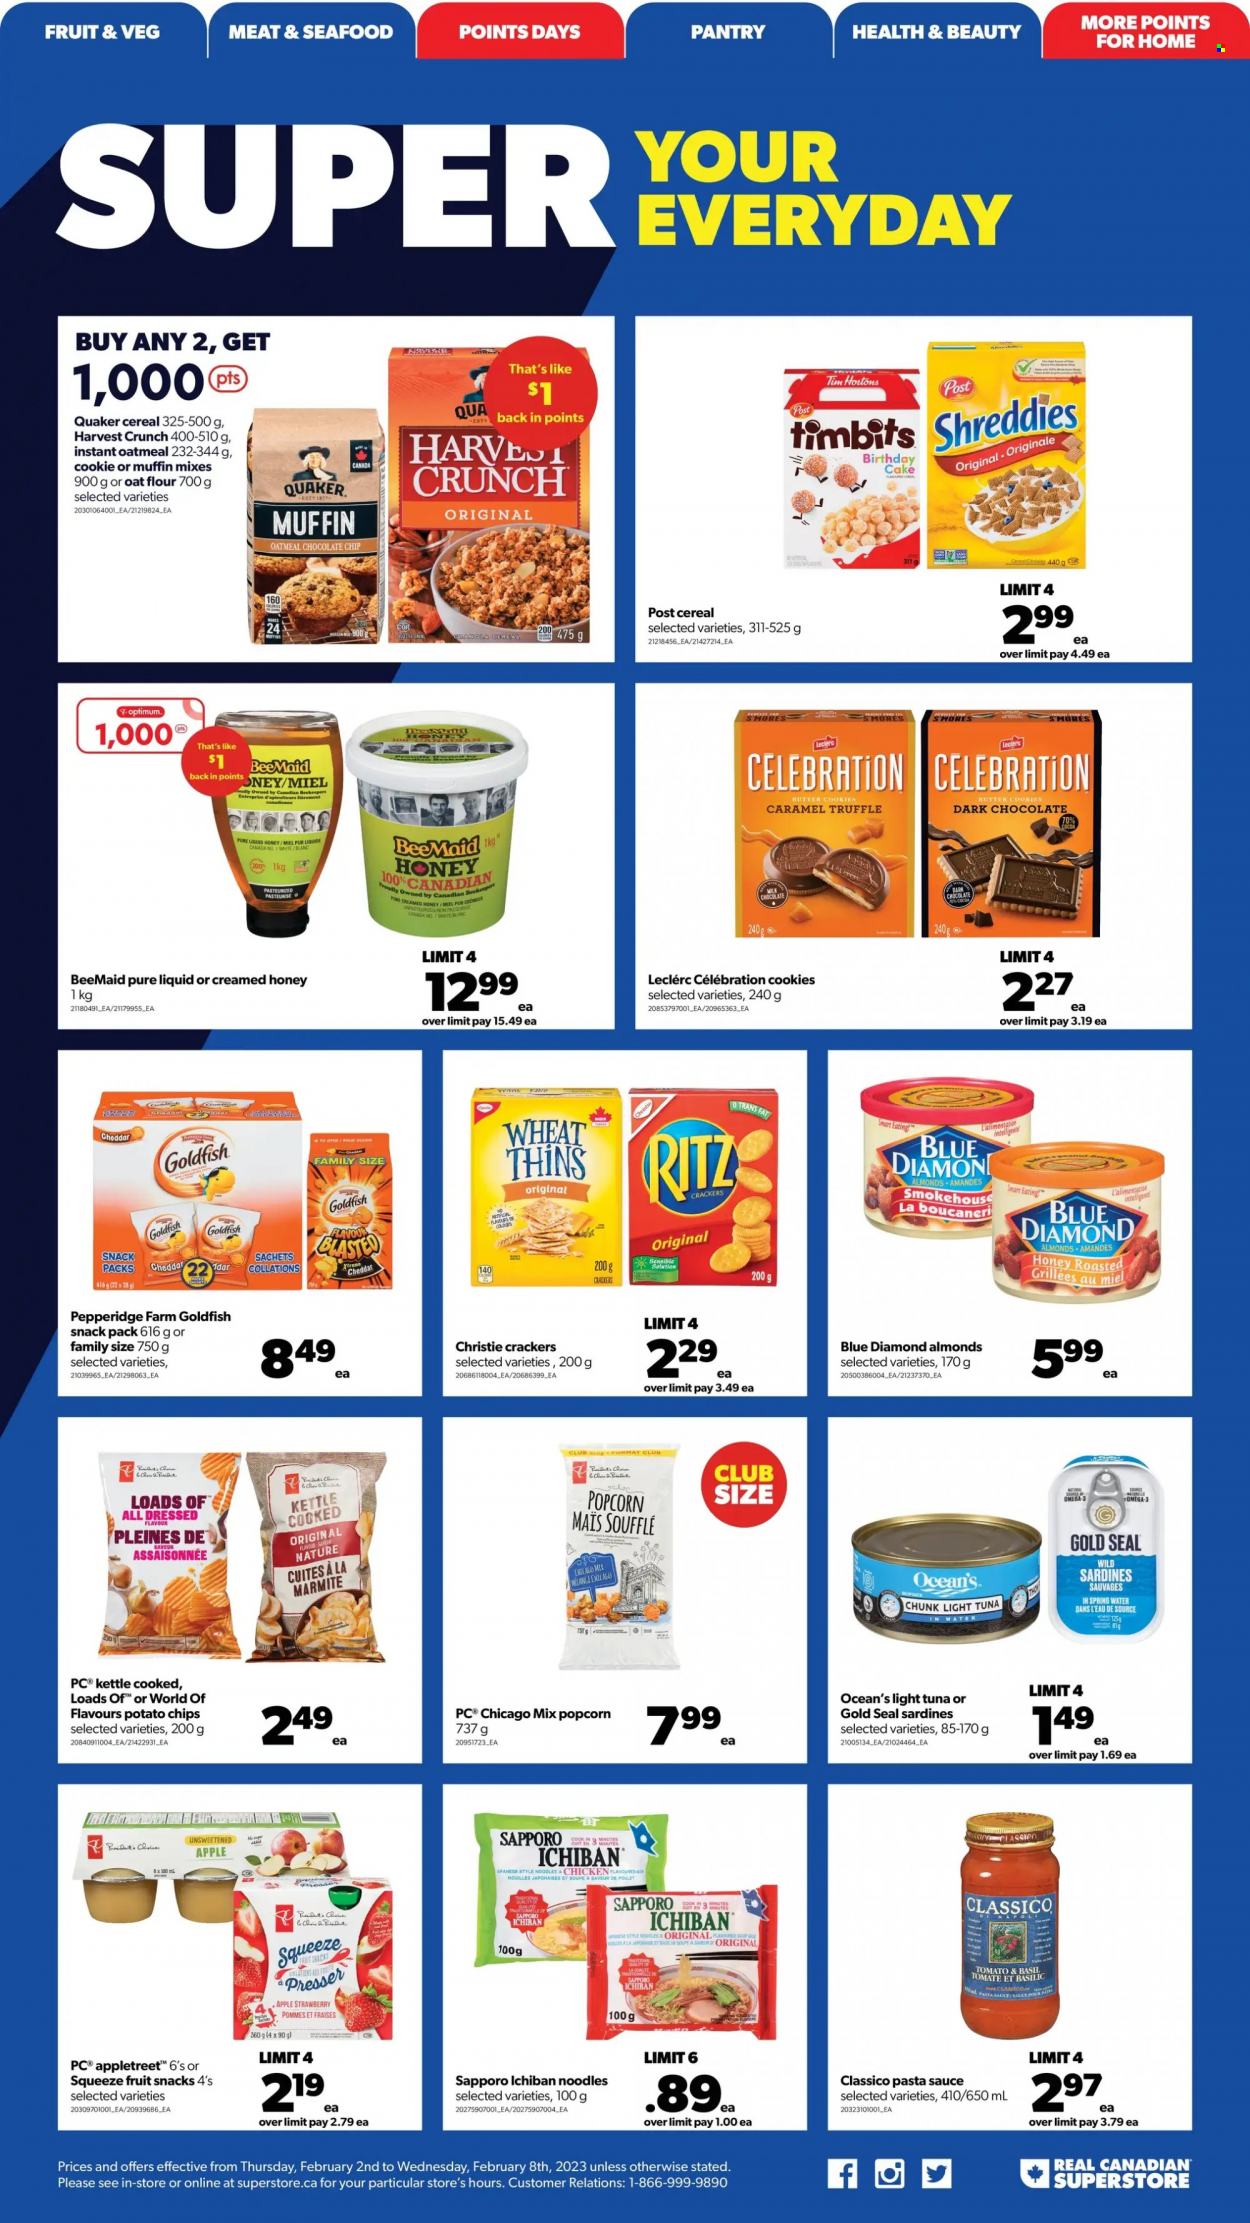 thumbnail - Real Canadian Superstore Flyer - February 02, 2023 - February 08, 2023 - Sales products - cake, muffin, sardines, tuna, seafood, pasta sauce, sauce, Quaker, noodles, cookies, truffles, Celebration, crackers, dark chocolate, fruit snack, RITZ, potato chips, chips, Thins, popcorn, Goldfish, flour, oatmeal, light tuna, cereals, Classico, honey, almonds, Blue Diamond, spring water, Optimum. Page 11.